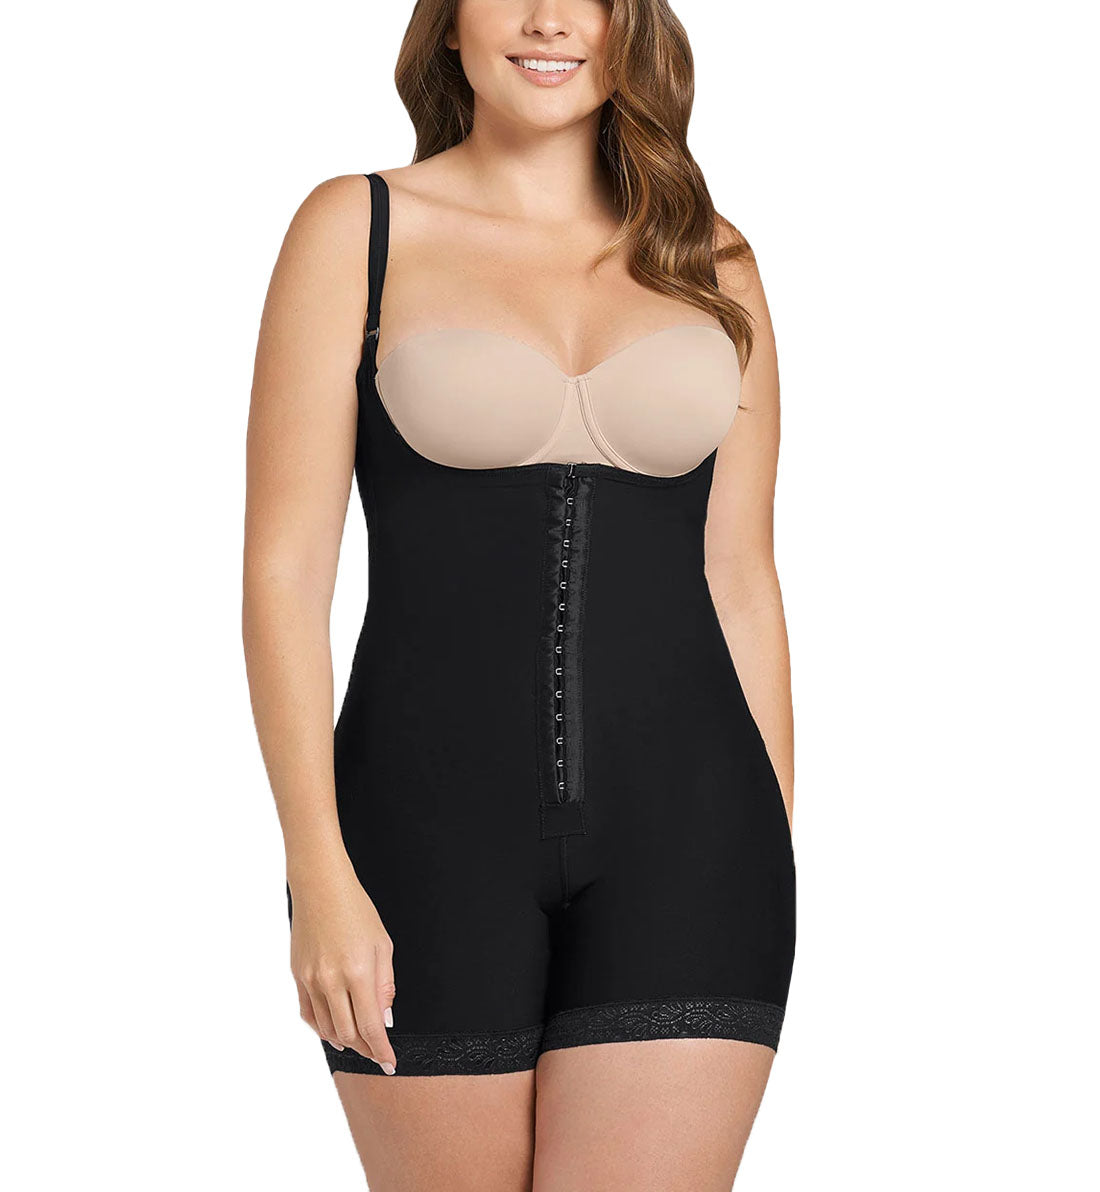 Leonisa Firm Compression Shaper with Boyshort Butt Lifter (018491),Small,Black - Black,Small